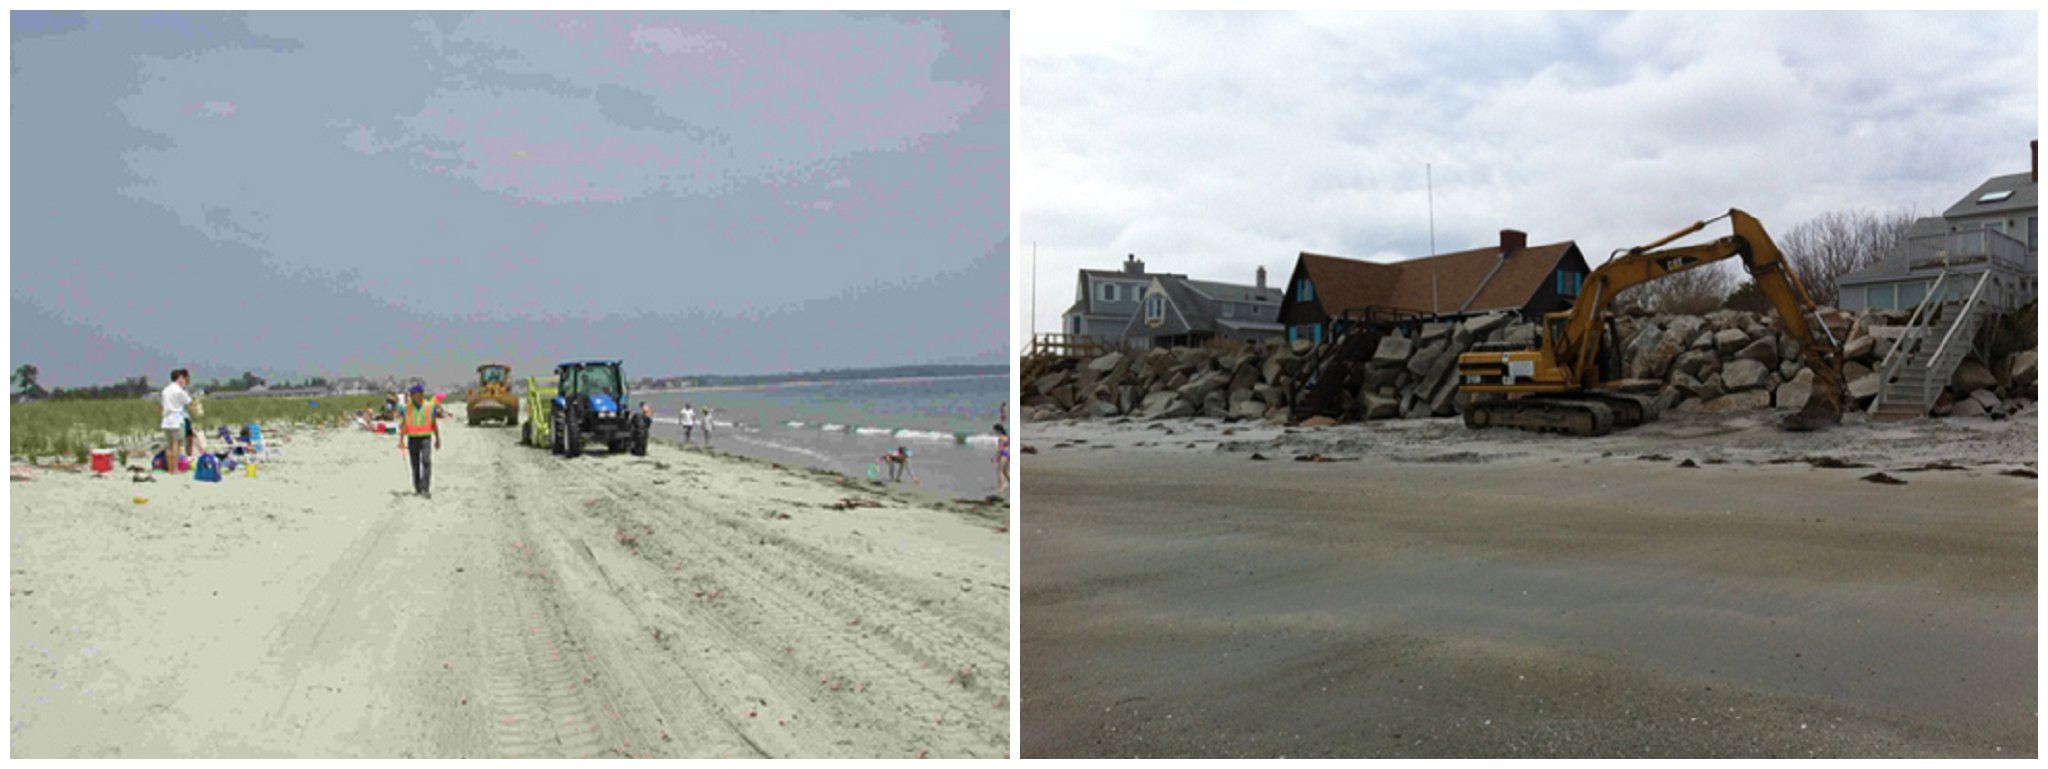 Essential Habitat designation allows MDIFW biologists to provide input on beach activities that may be detrimental to piping plovers and least terns like beach cleaning (left) and seawall repair (right). 